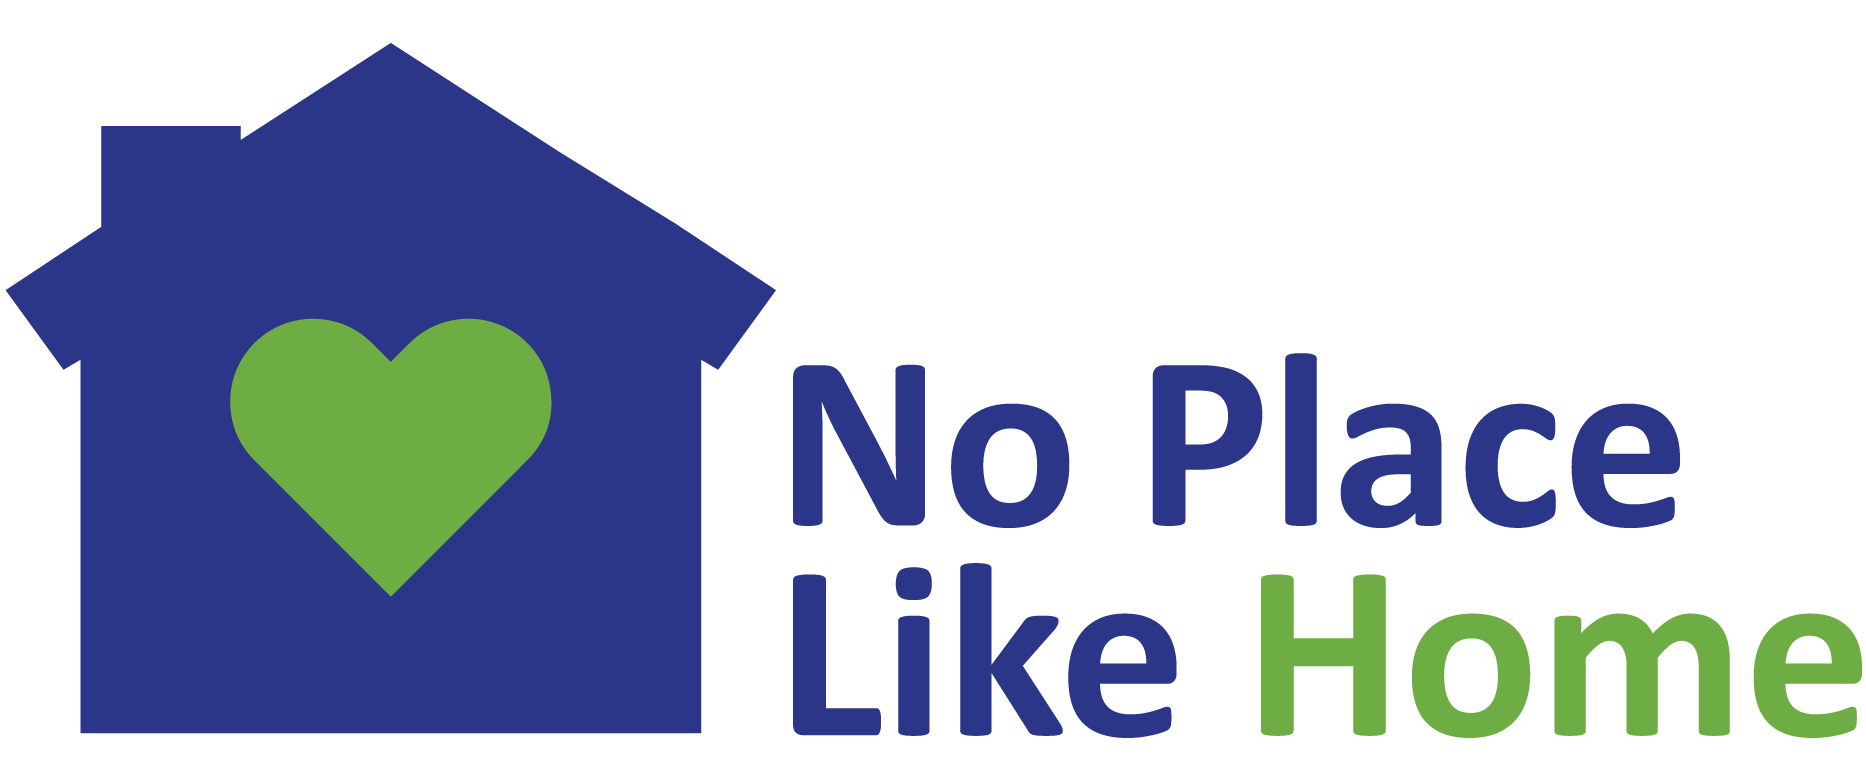 No Place Like Home Logo Blue house silhouette to the left with green heart in the center with No Place Like Home to the right.